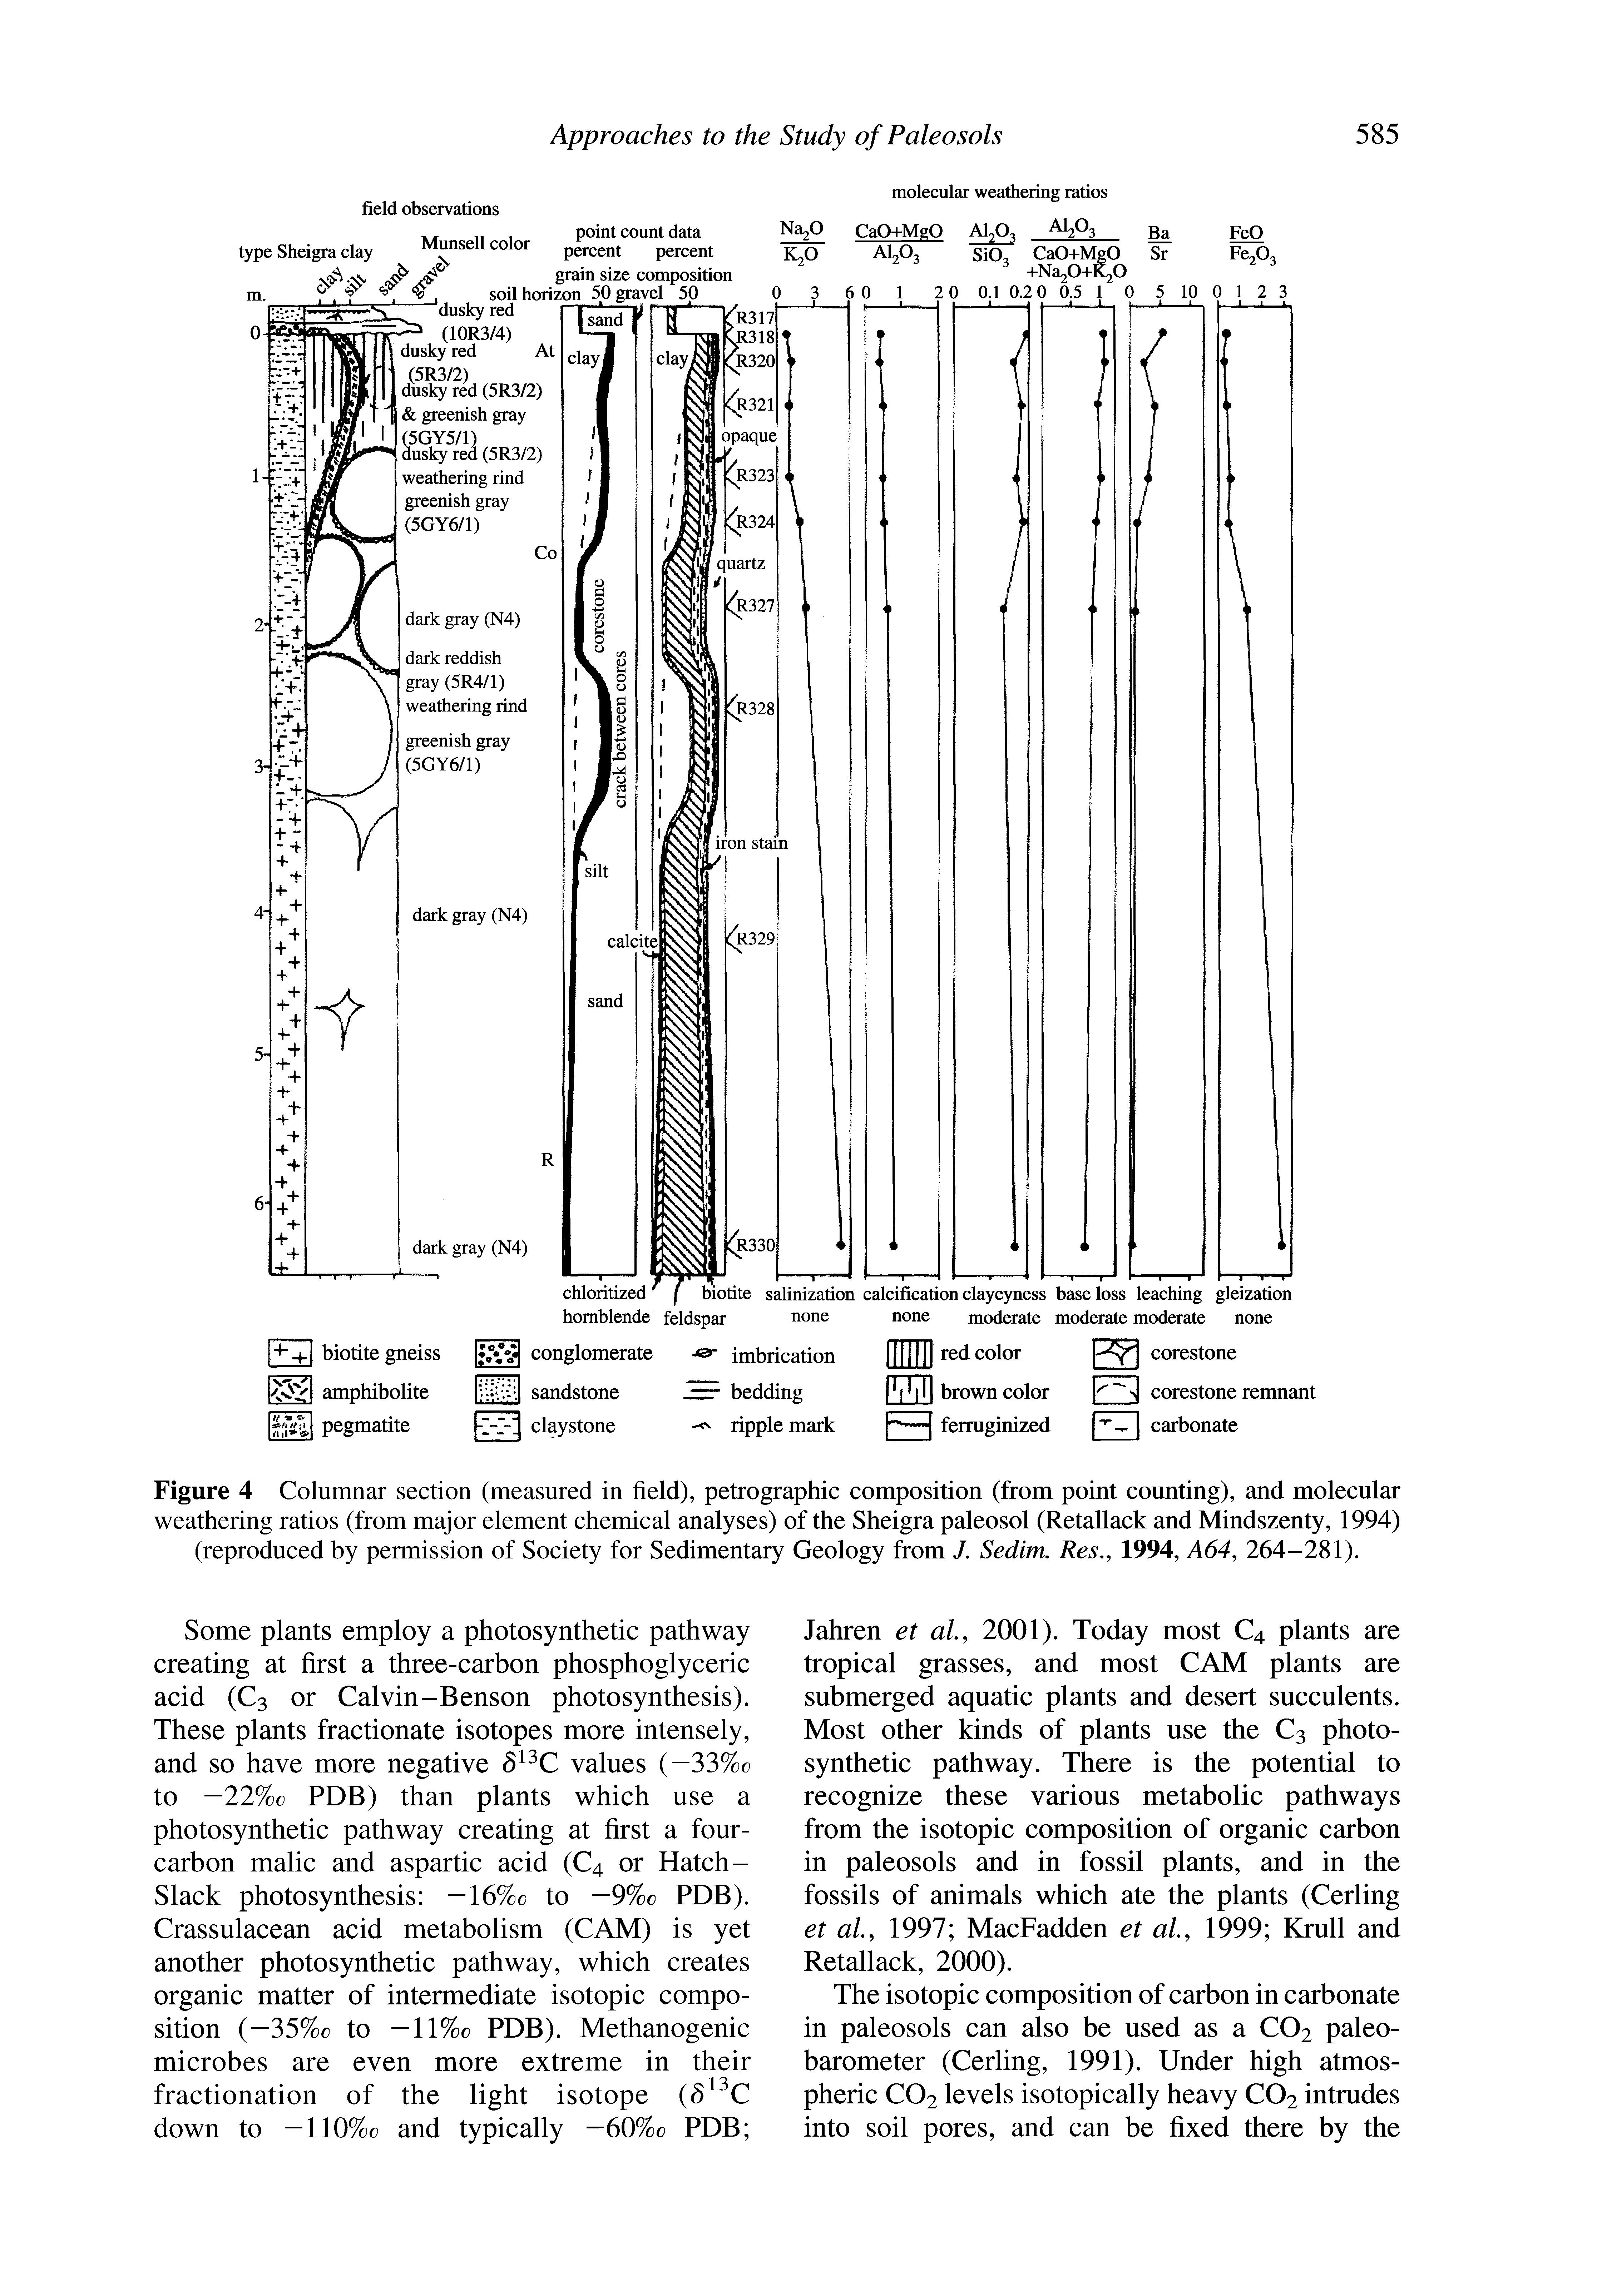 Figure 4 Columnar section (measured in field), petrographic composition (from point counting), and molecular weathering ratios (from major element chemical analyses) of the Sheigra paleosol (Retallack and Mindszenty, 1994) (reproduced by permission of Society for Sedimentary Geology from J. Sedim. Res., 1994, A64, 264-281).